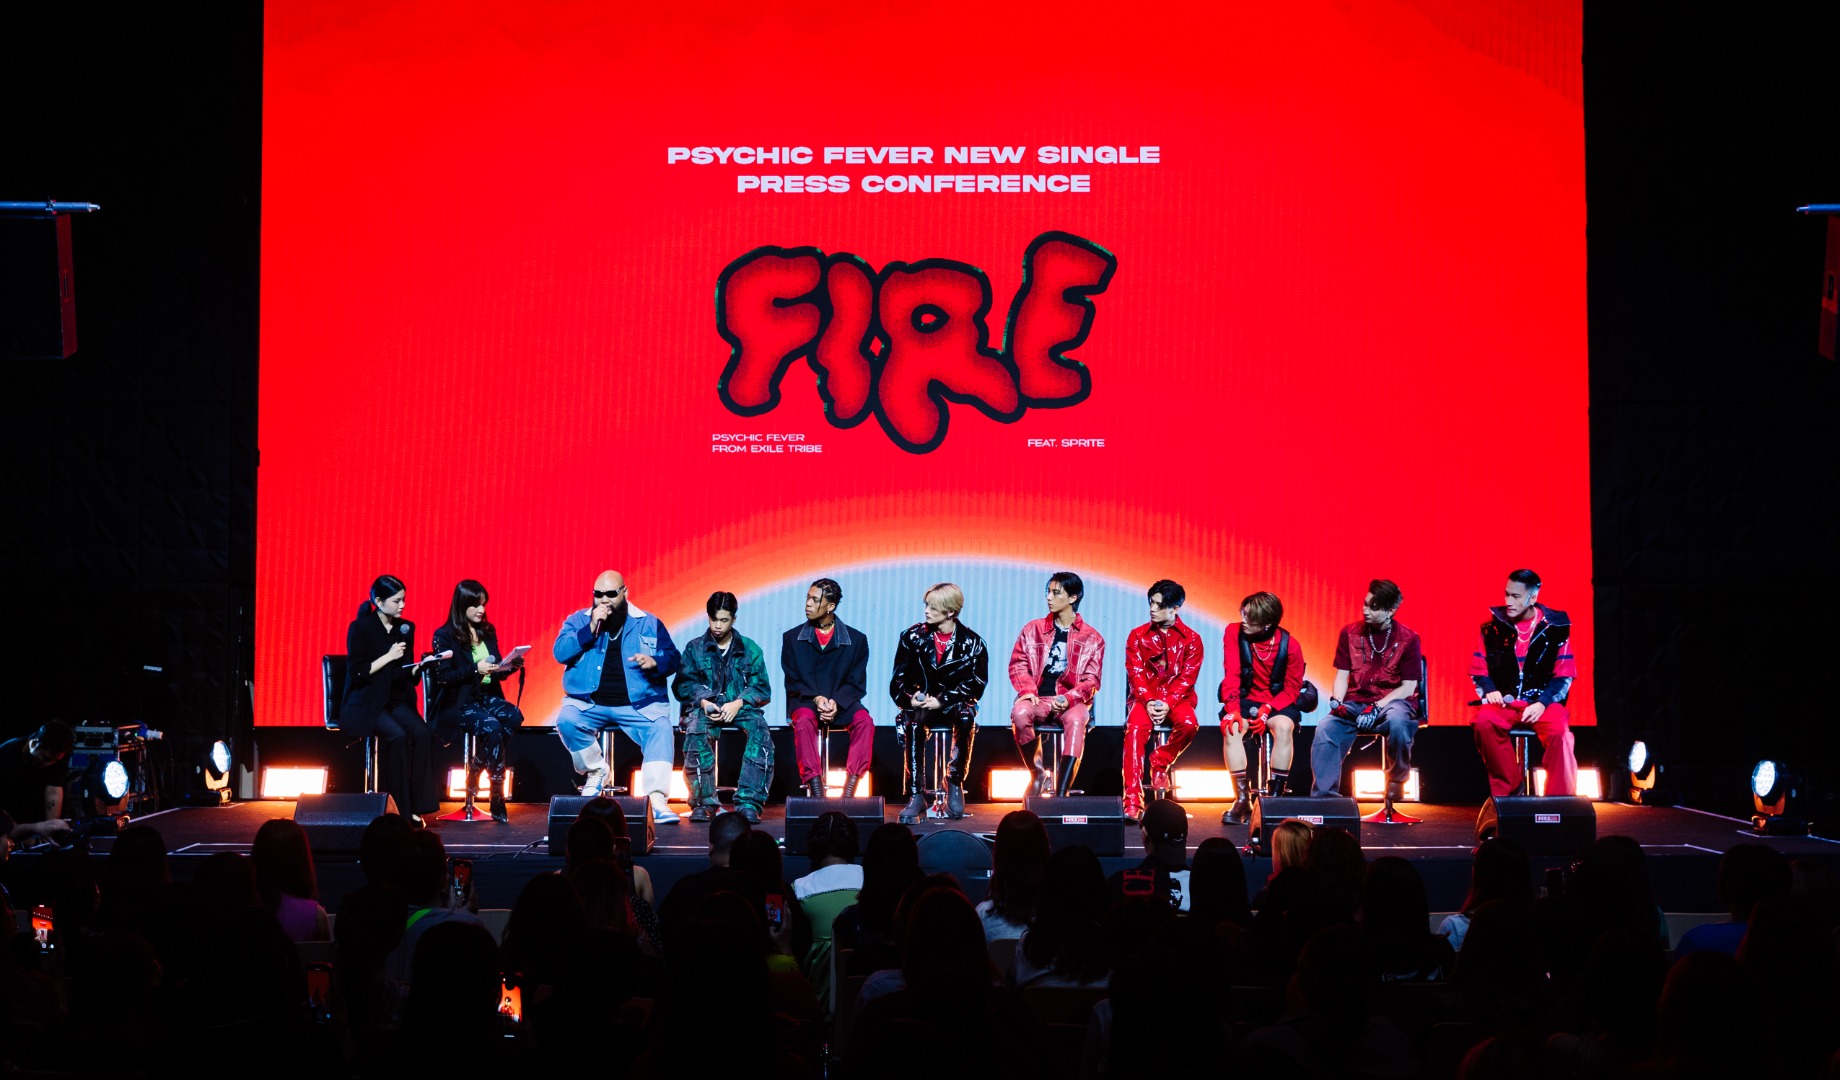 PSYCHIC FEVER NEW SINGLE PRESS CONFERENCE “FIRE feat. SPRITE”